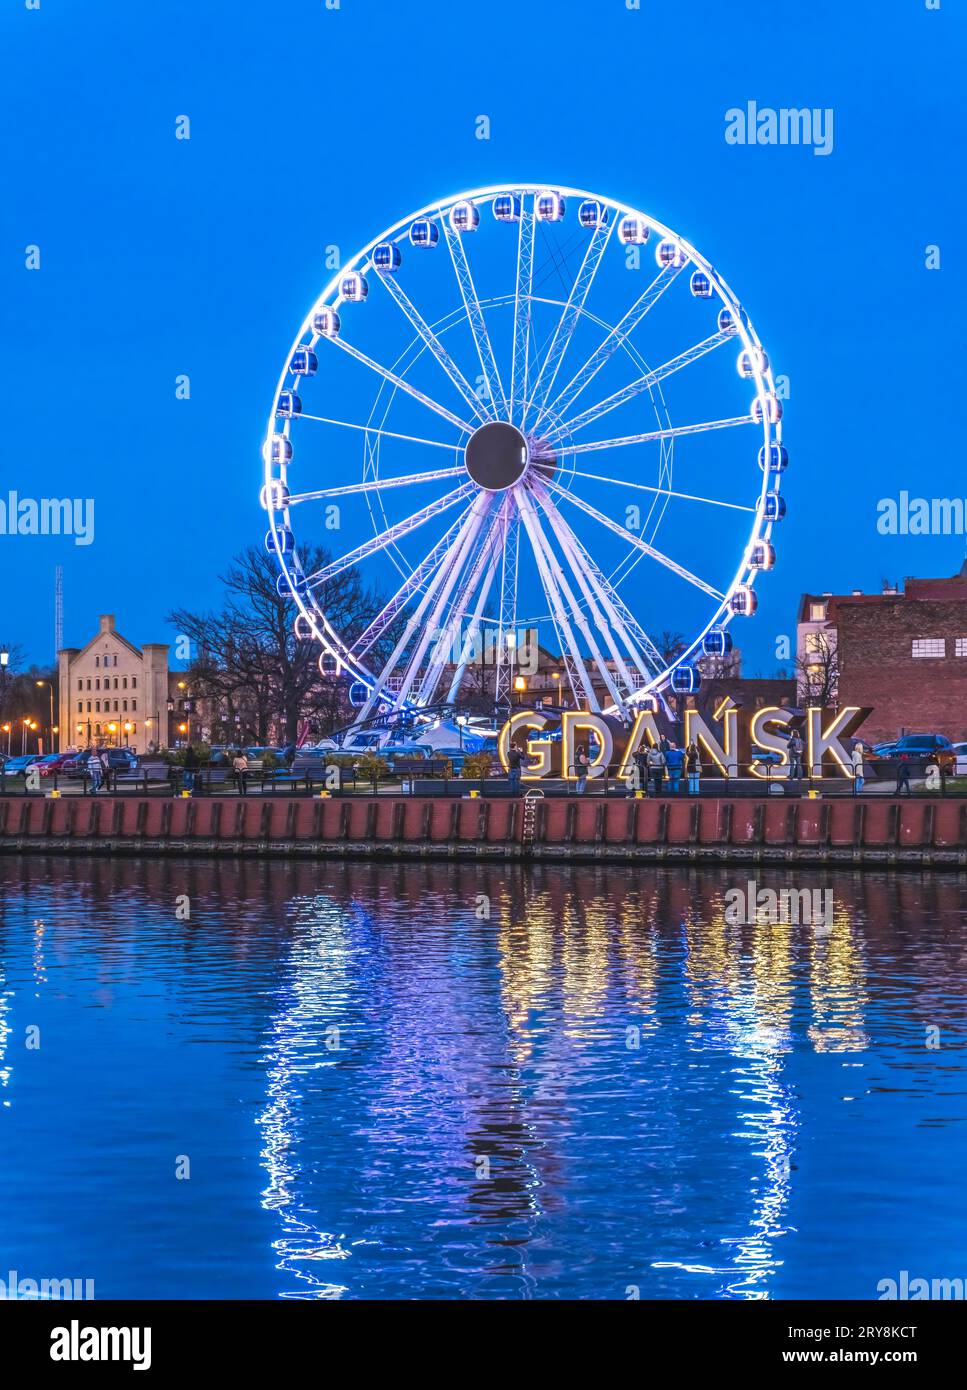 Colorful Ferris Wheel Illuminated Night Sign Inner Harbor Port Motlawa River Historic Old Town of Gdansk Poland. City formerly known as Danzig. Stock Photo